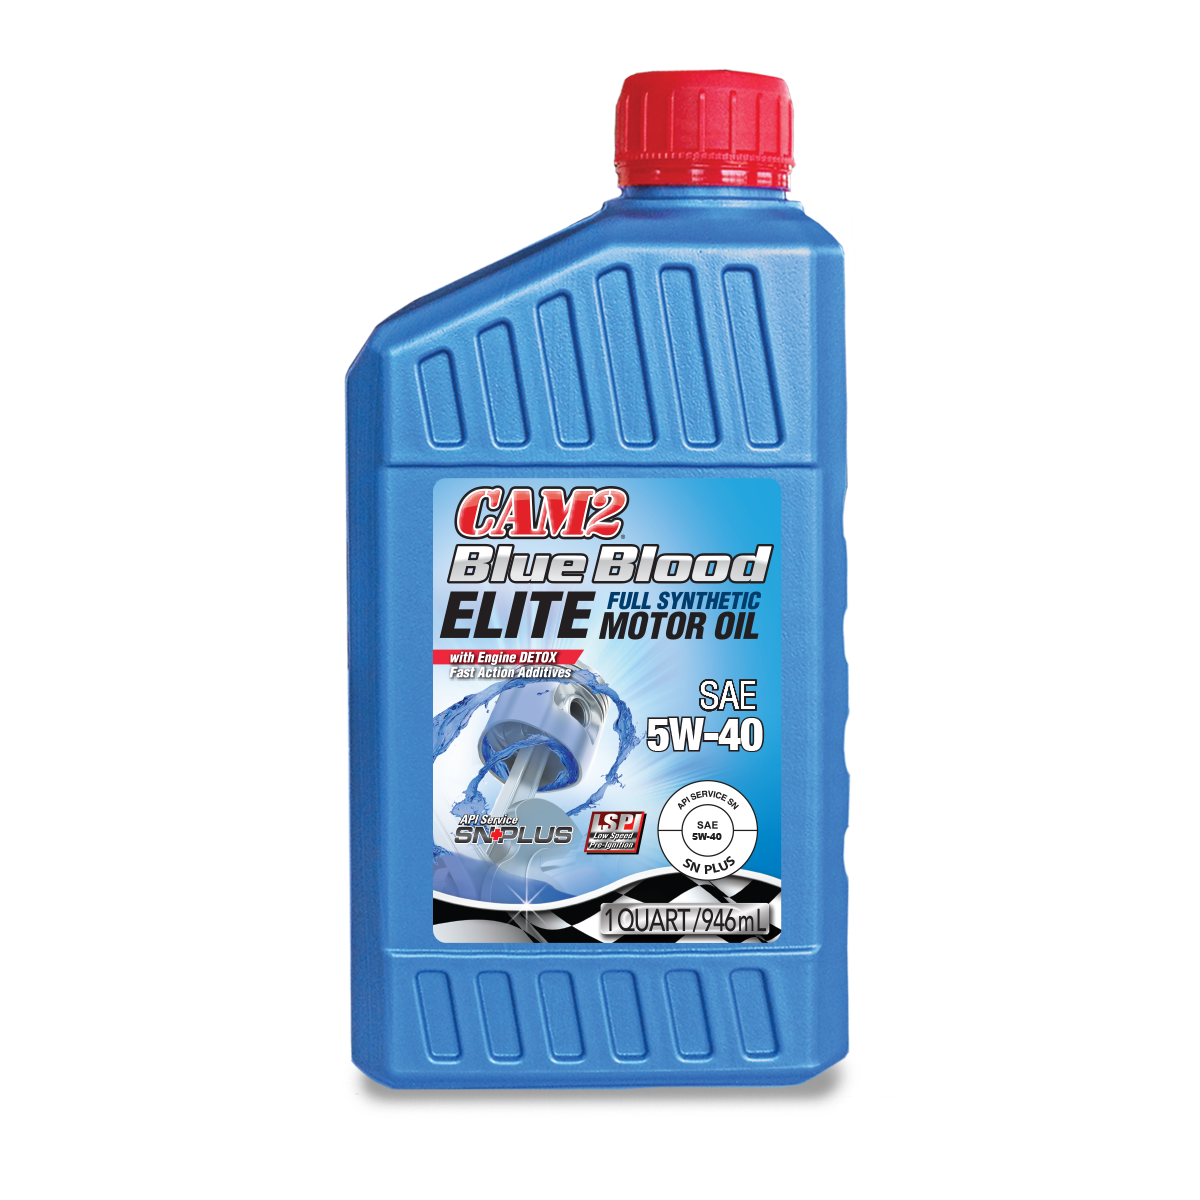 CAM2 BLUE BLOOD ELITE 5W-40 SN PLUS FULL SYNTHETIC ENGINE OIL 80565-368